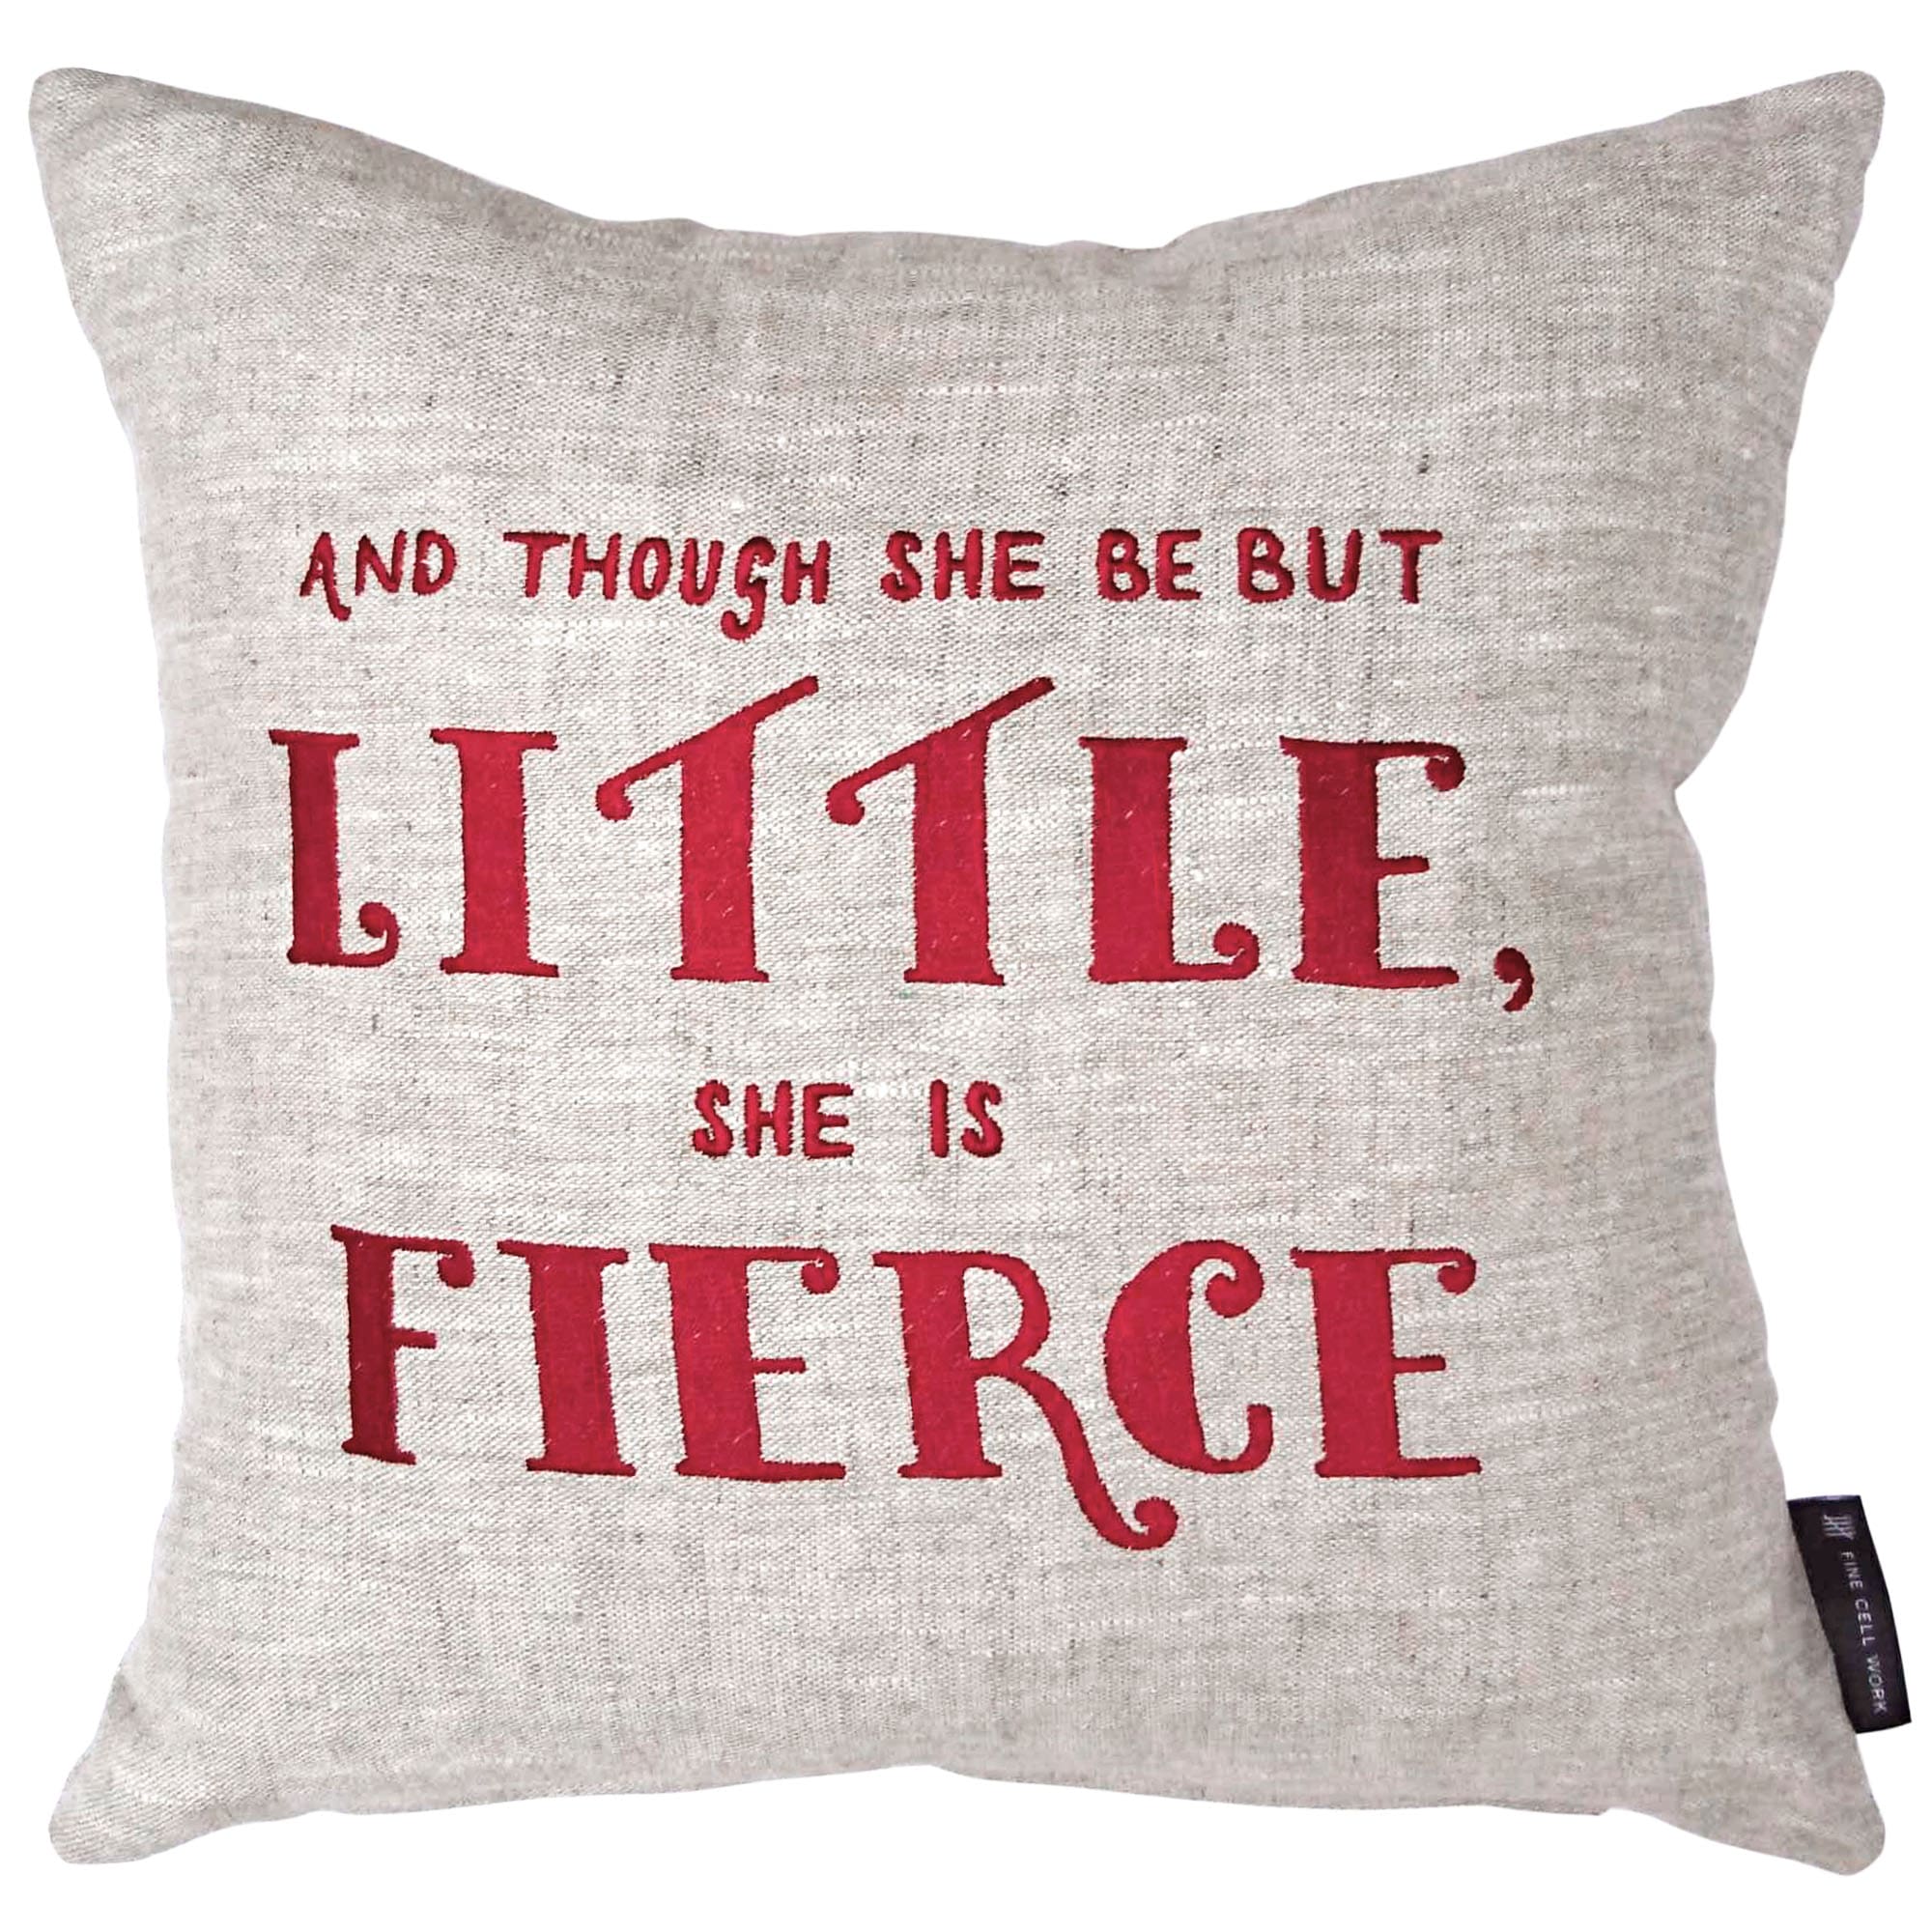 Fine-Cell-Work-Shakespeare-Quote-Cushion-Red-Oatmeal-Little-But-Fierce.jpg